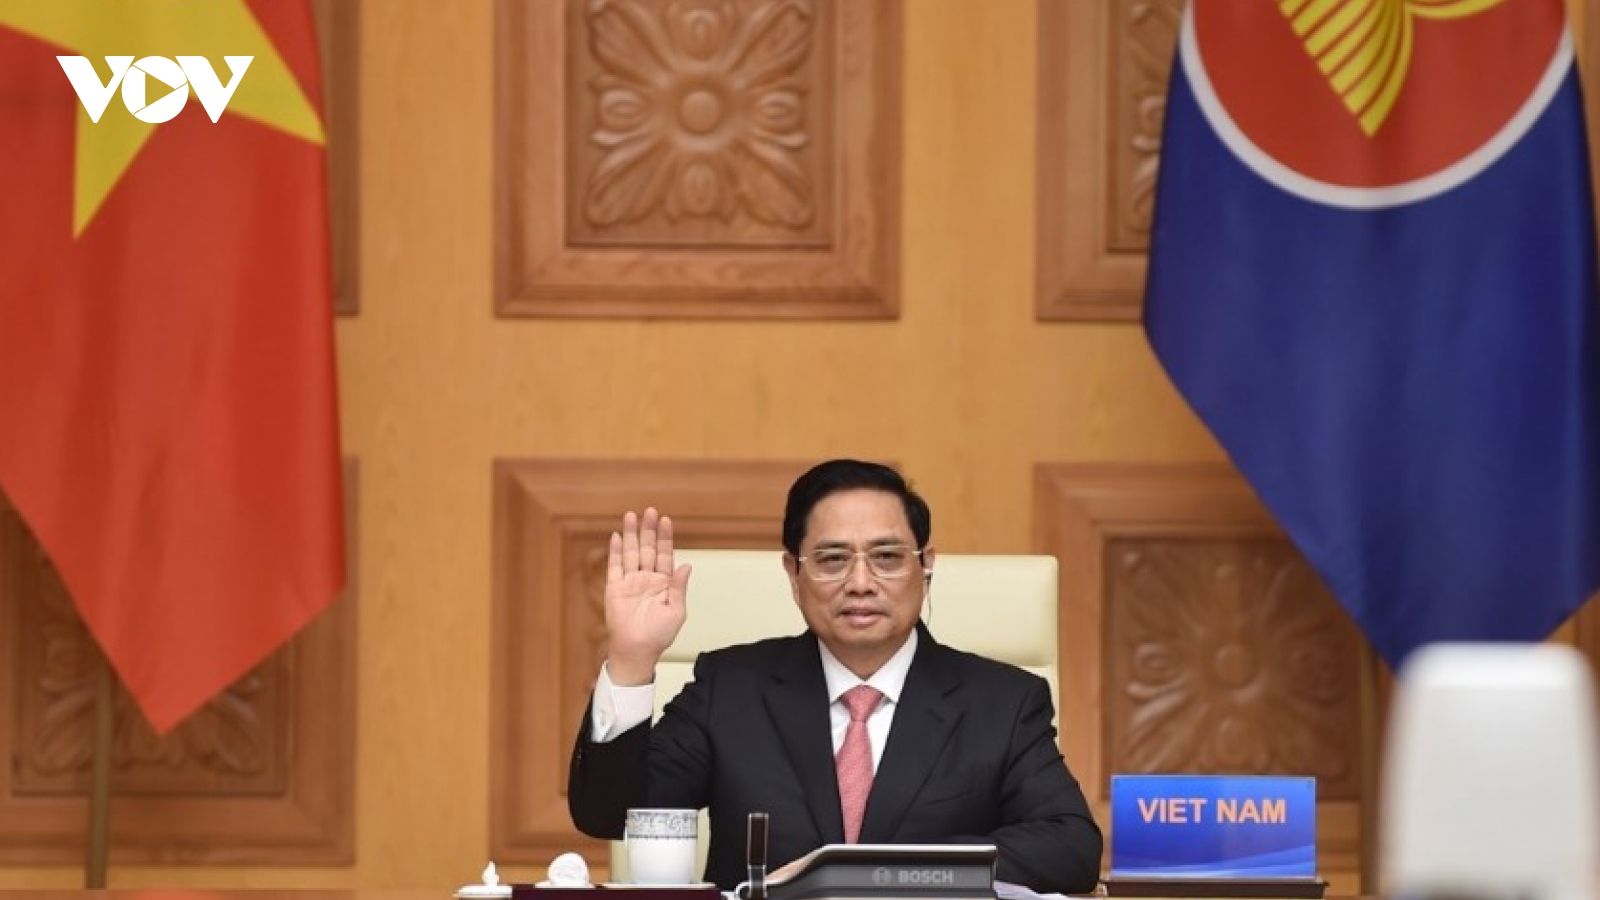 Vietnam continues to foster ASEAN-China strategic partnership, PM Chinh says